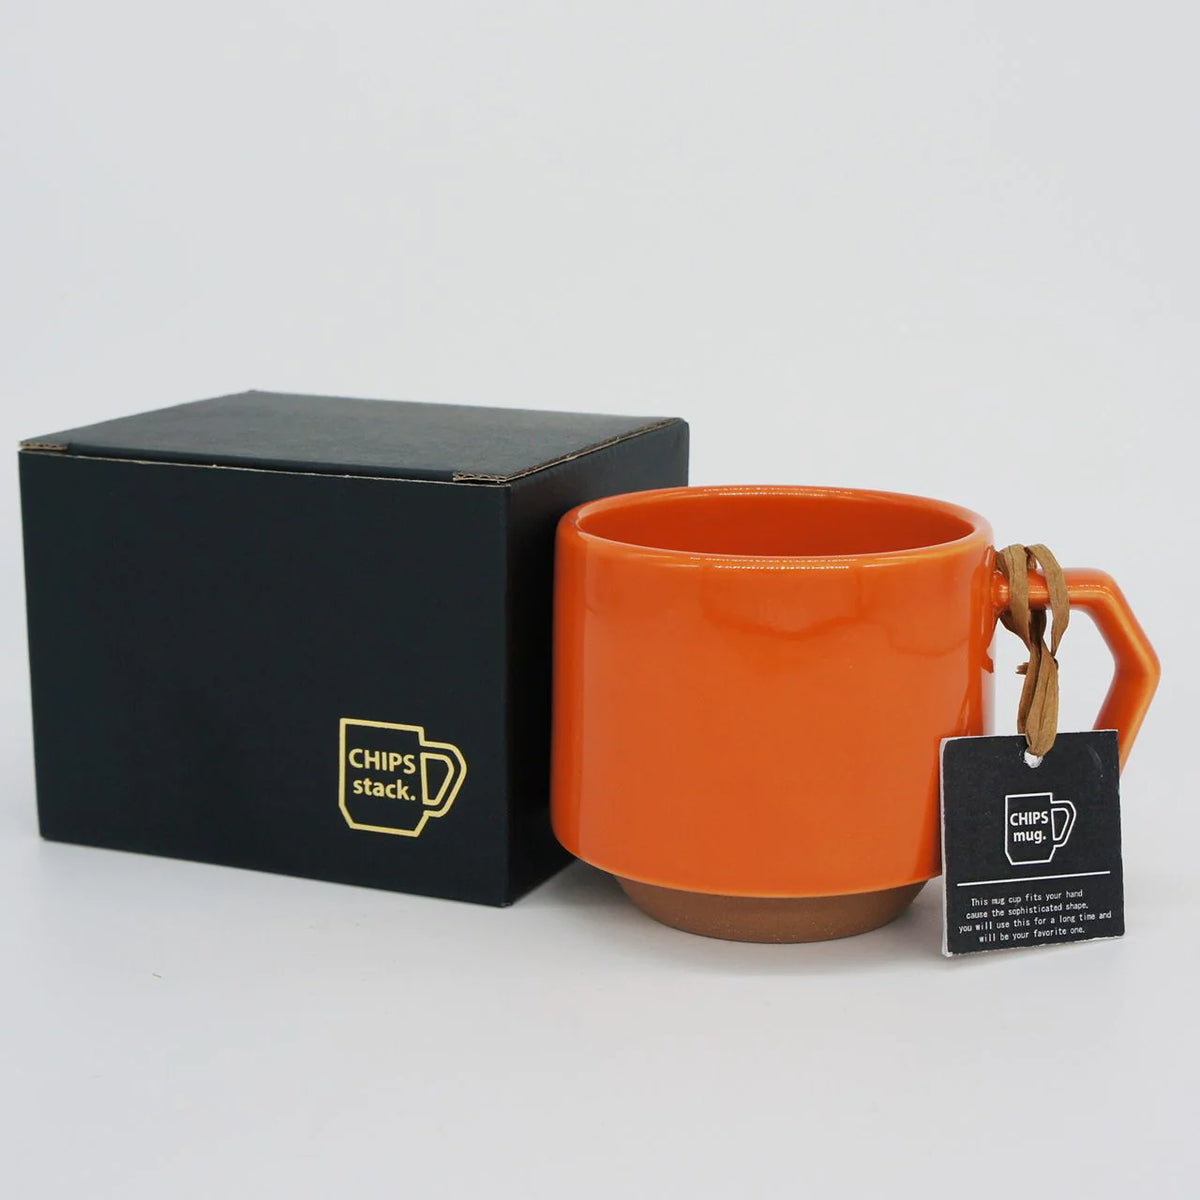 A Stacking Mug - Orange with a black tag made by CHIPS Inc.